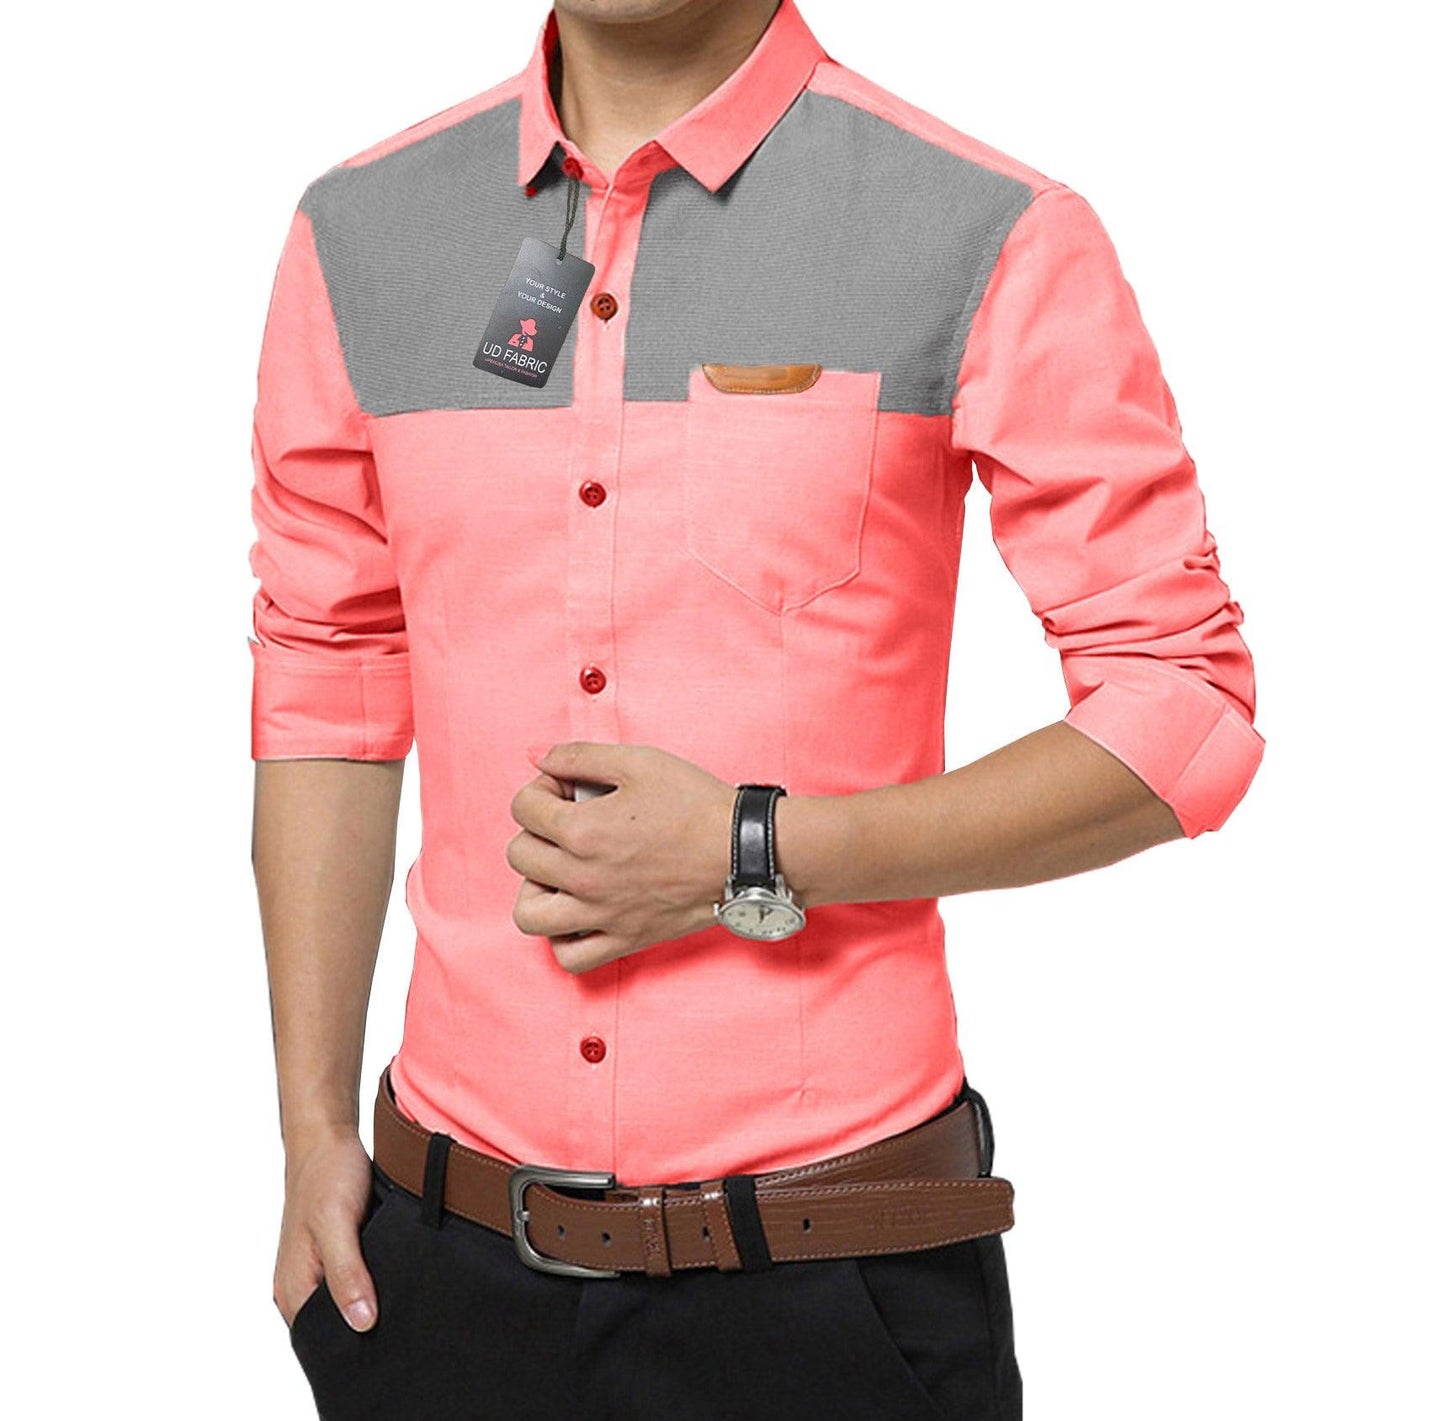 UD FABRIC Casual Slim Cotton Shirt for Men - Pink - UD FABRIC - Your Style our Design